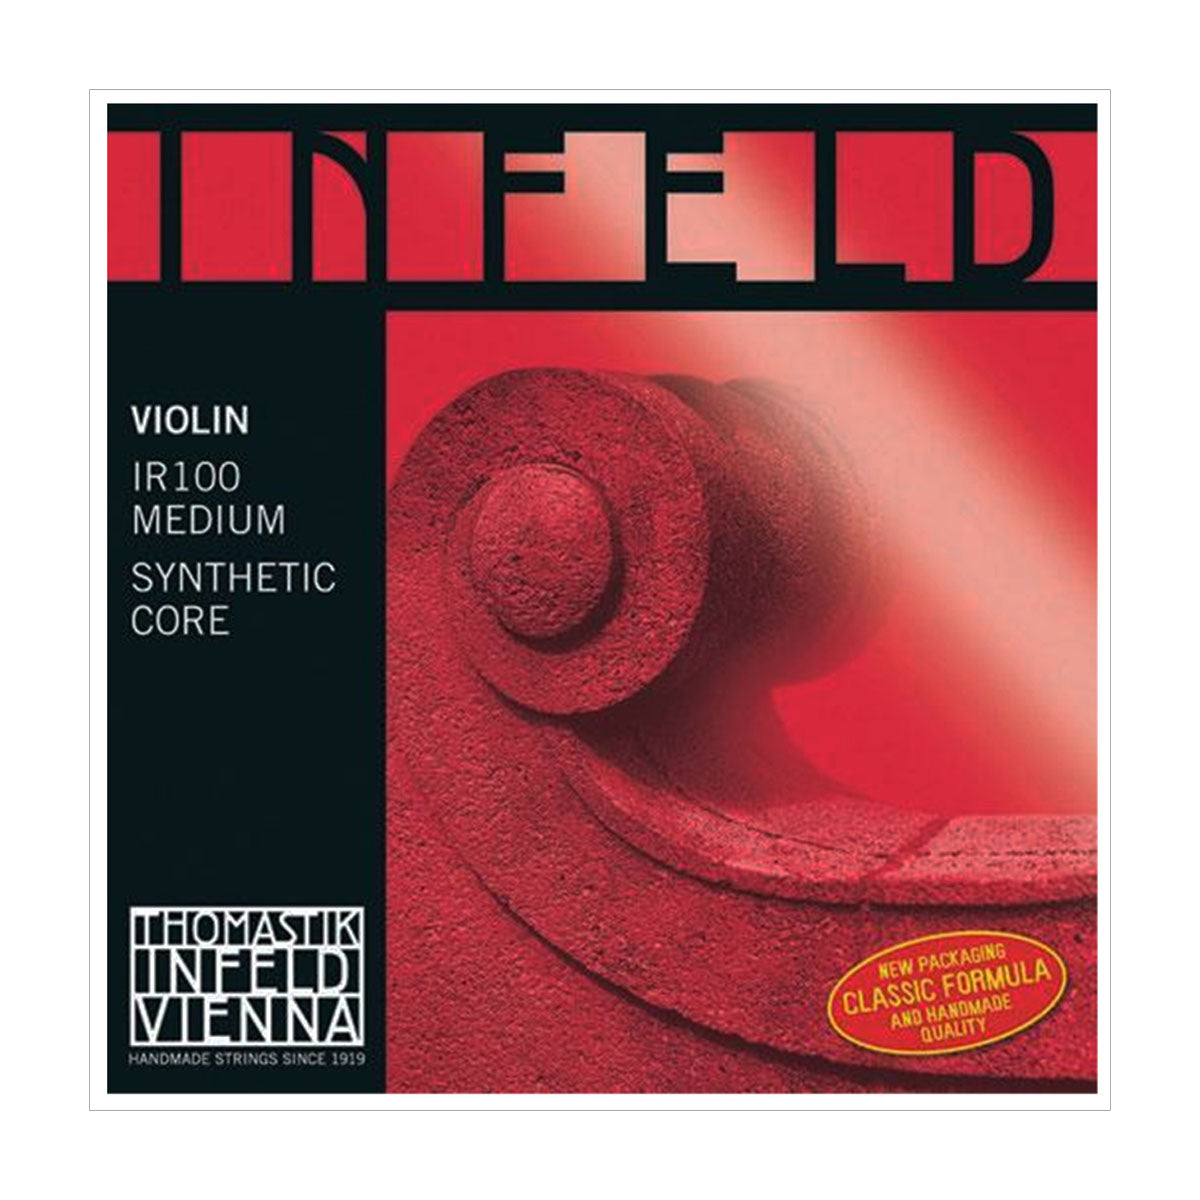 Infeld Red Violin Strings, Thomastik Infeld, Austria, full size, 4/4, 3/4, 1/2, 1/4, 1/8, 1/16, hand-picked and inspected by Violins and such, with TEO musical Instruments, London Ontario Canada